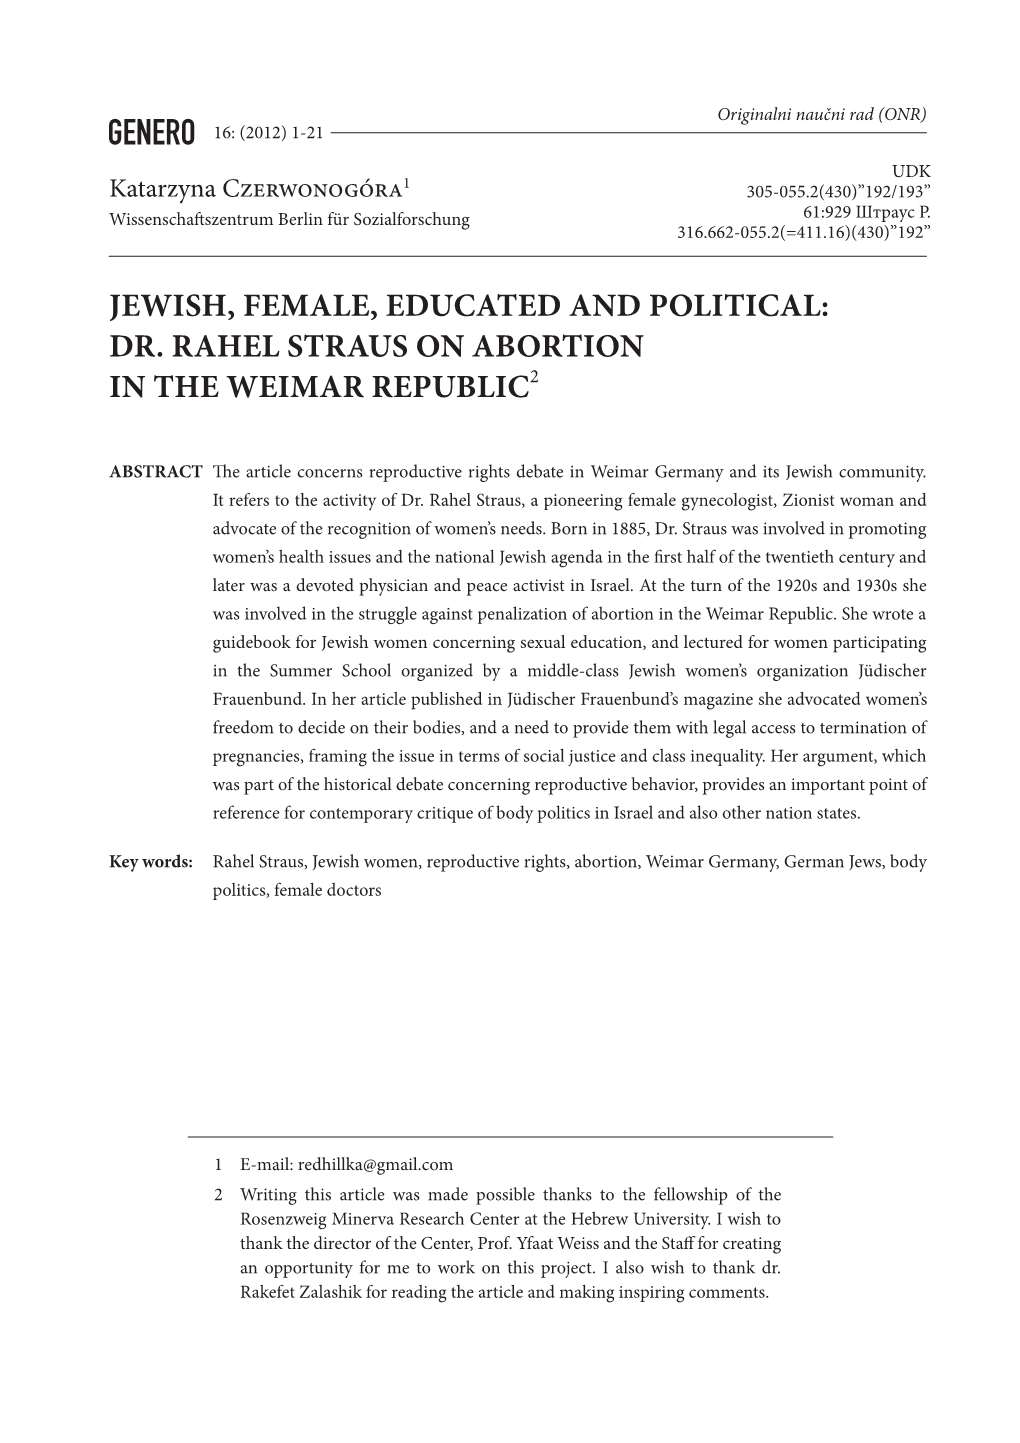 Jewish, Female, Educated and Political: Dr. Rahel Straus on Abortion in the Weimar Republic2